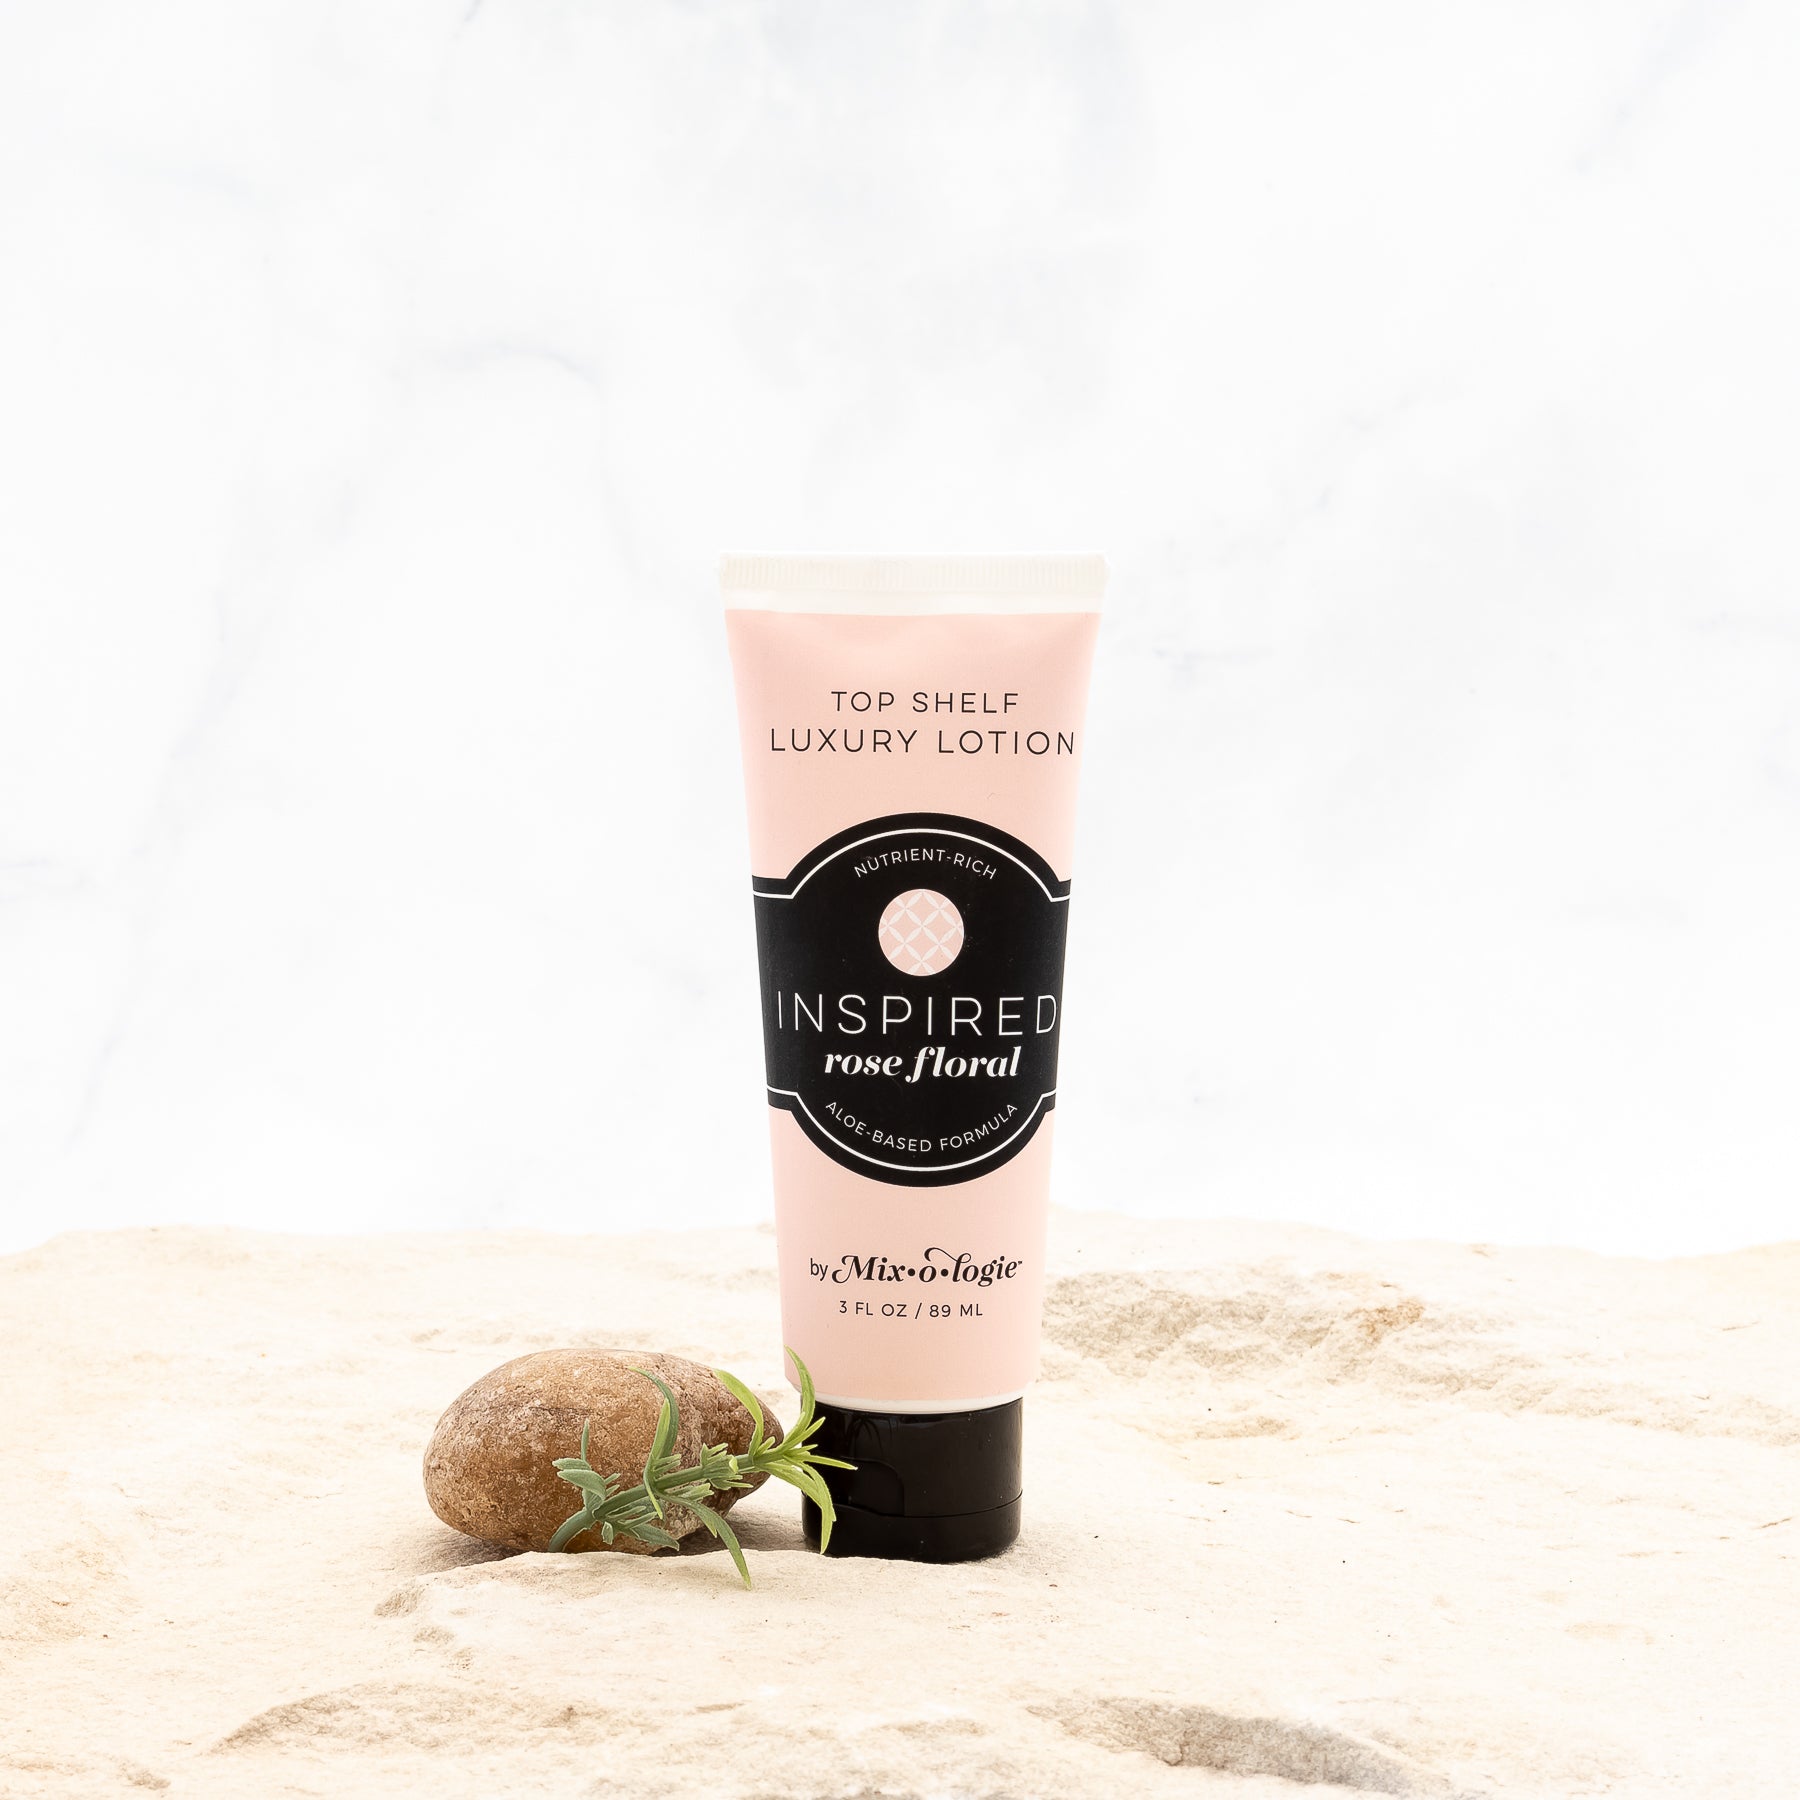 Inspired (Rose Floral) Top Shelf Lotion in pale pink tube with black lid and label. Nutrient rich, aloe-based formula, tube has 5 fl oz or 89 mL. Pictured with white background, sand, rocks, and greenery. 